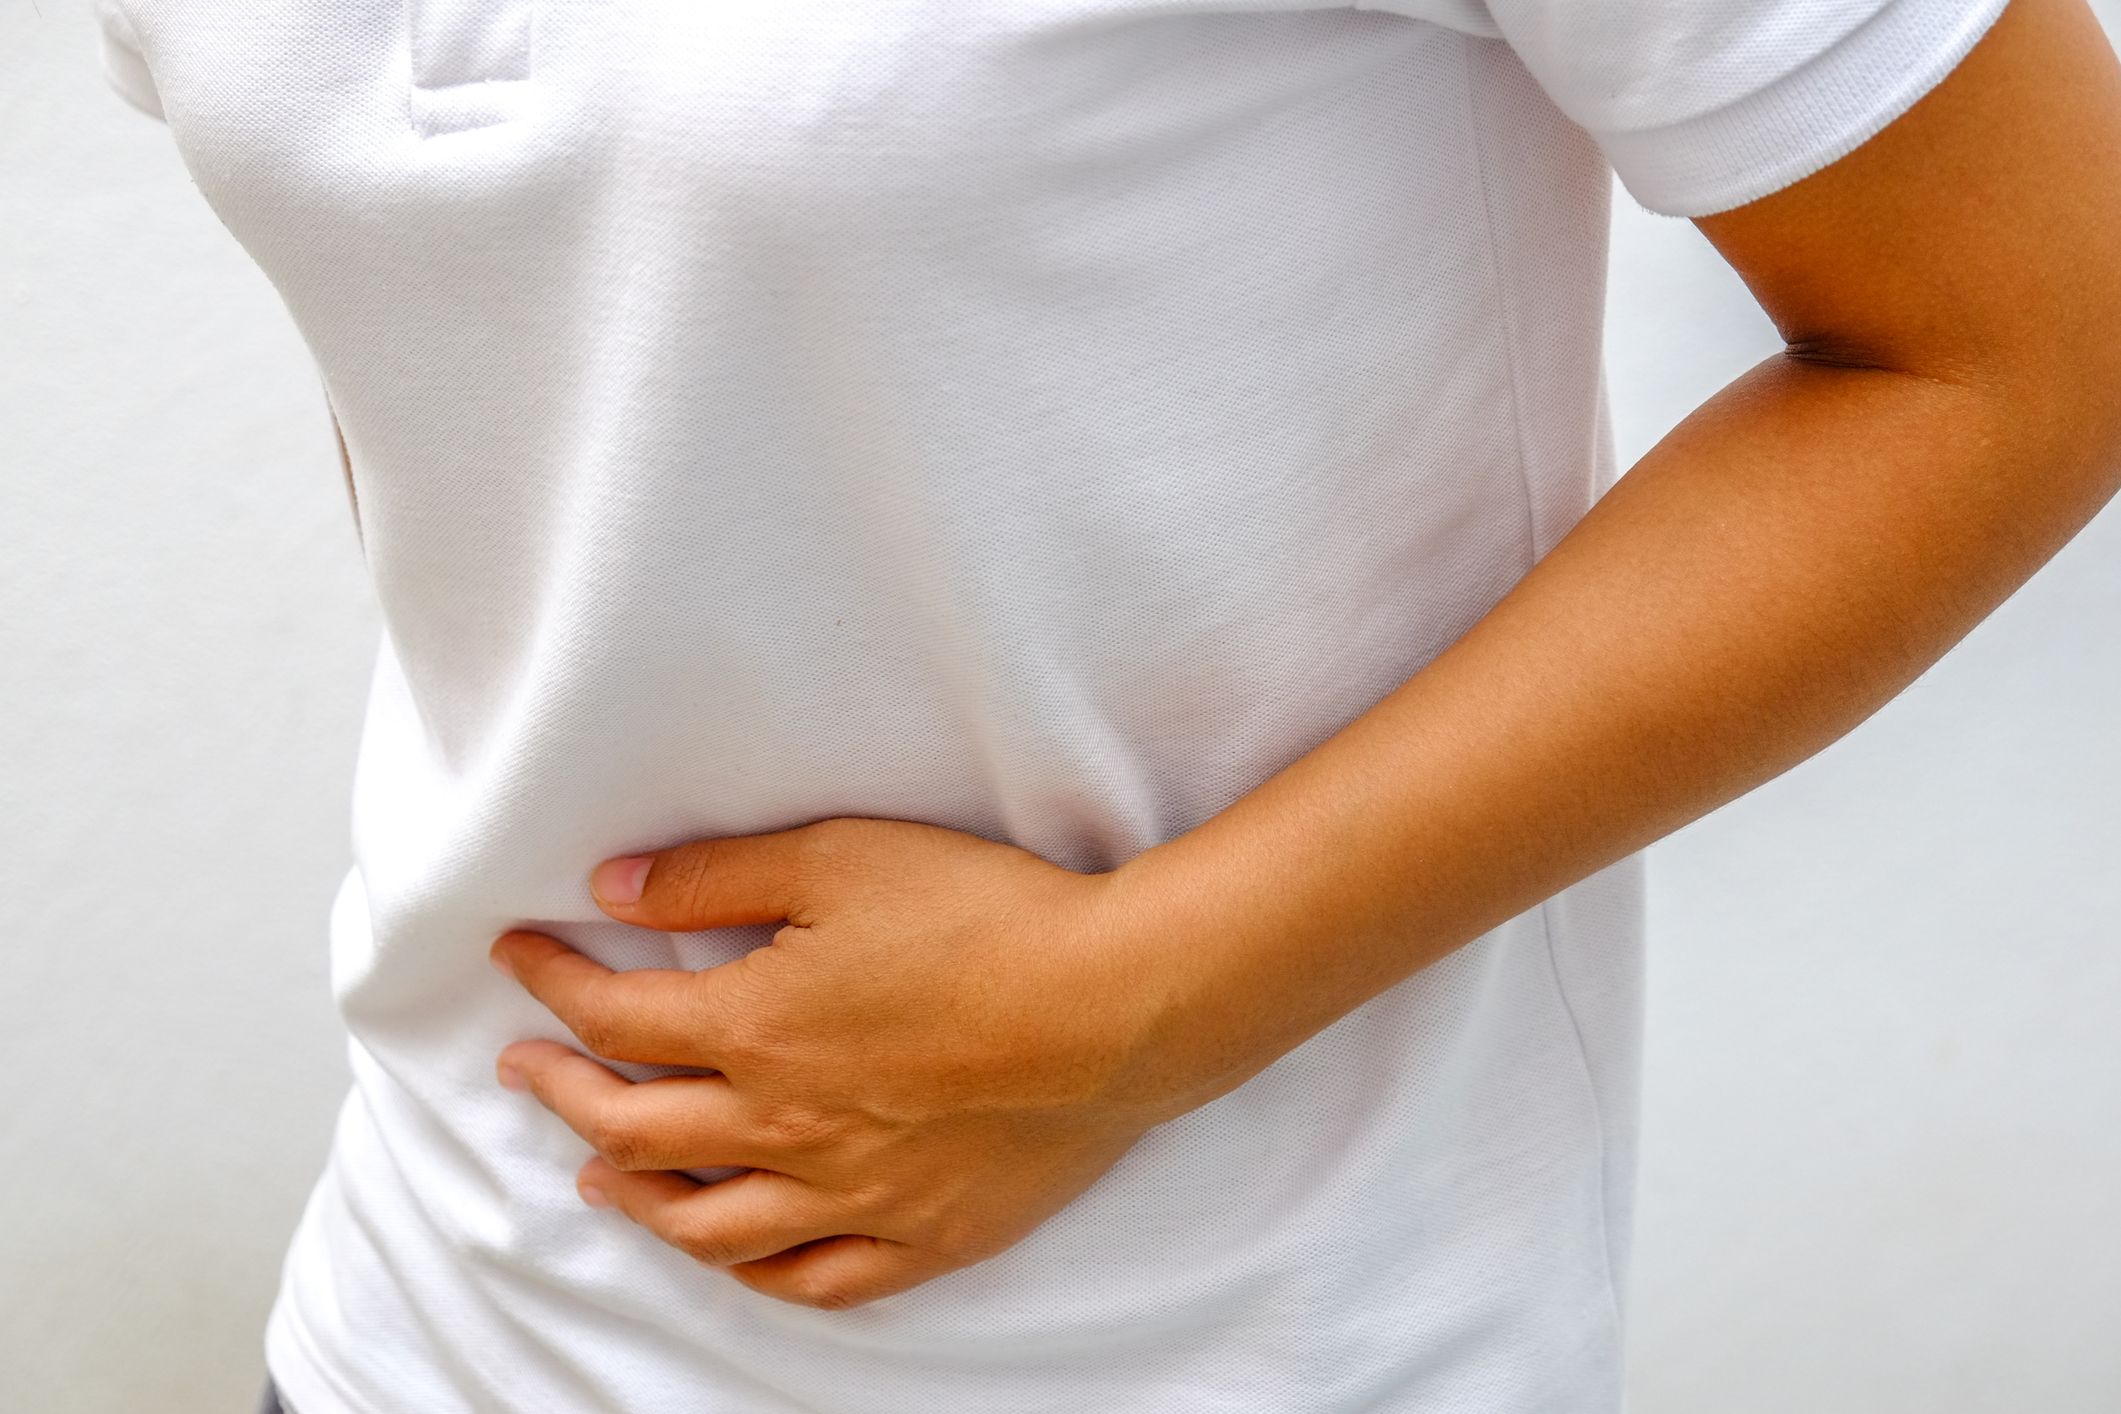 What are the Symptoms of Diverticulitis and the Treatment for Diverticulitis?